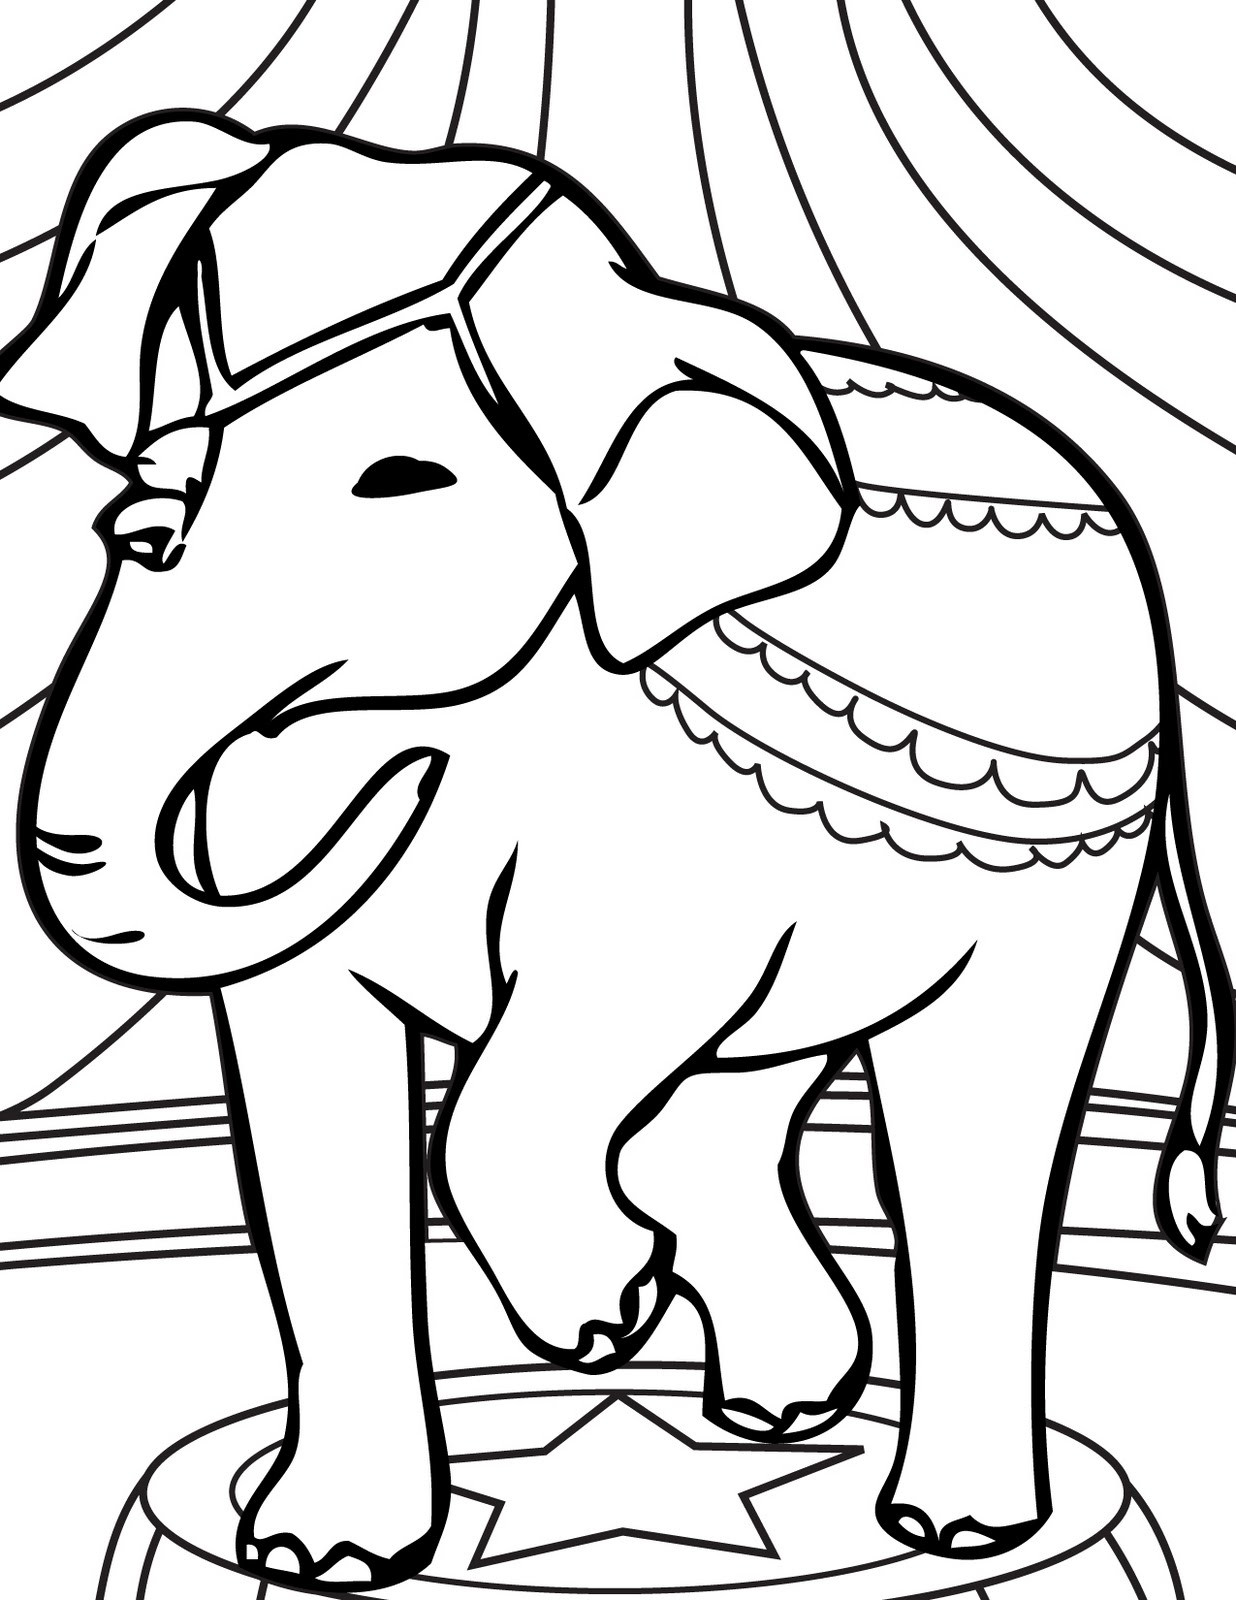 Kids Coloring Page
 transmissionpress Circus Elephant Coloring Pages